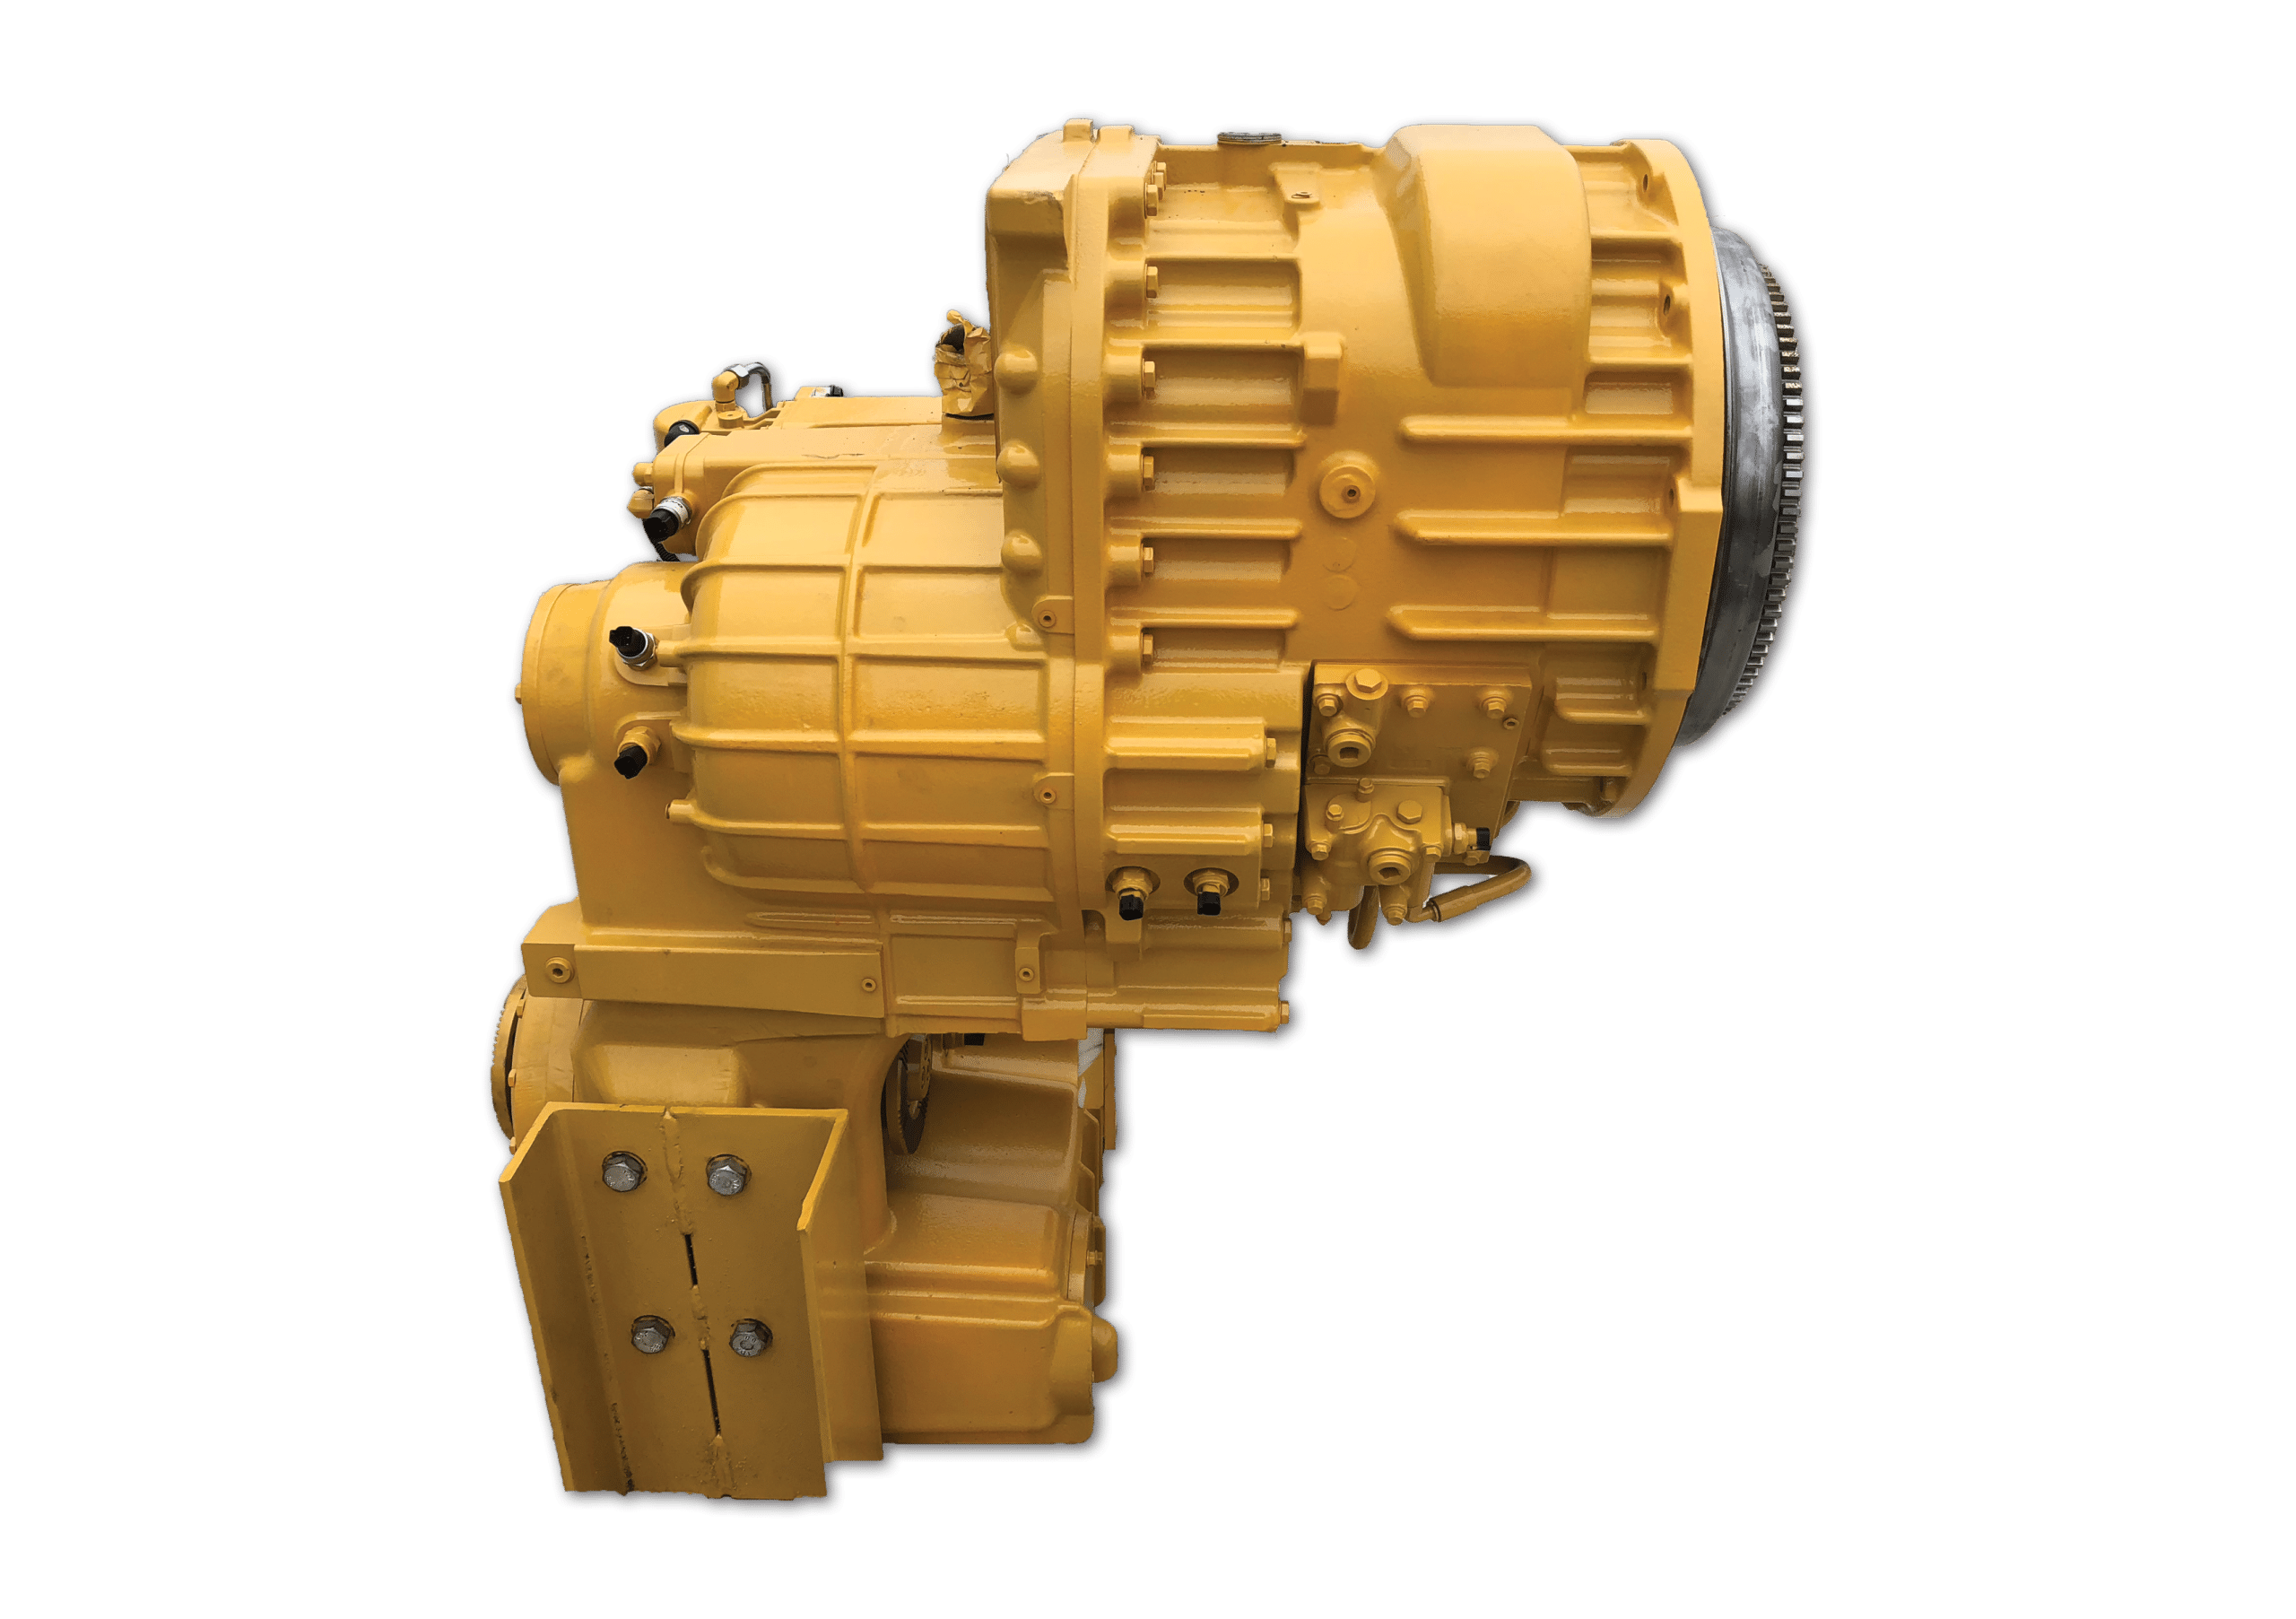 Volvo Wheel Loader Transmissions - Construction & mining parts for